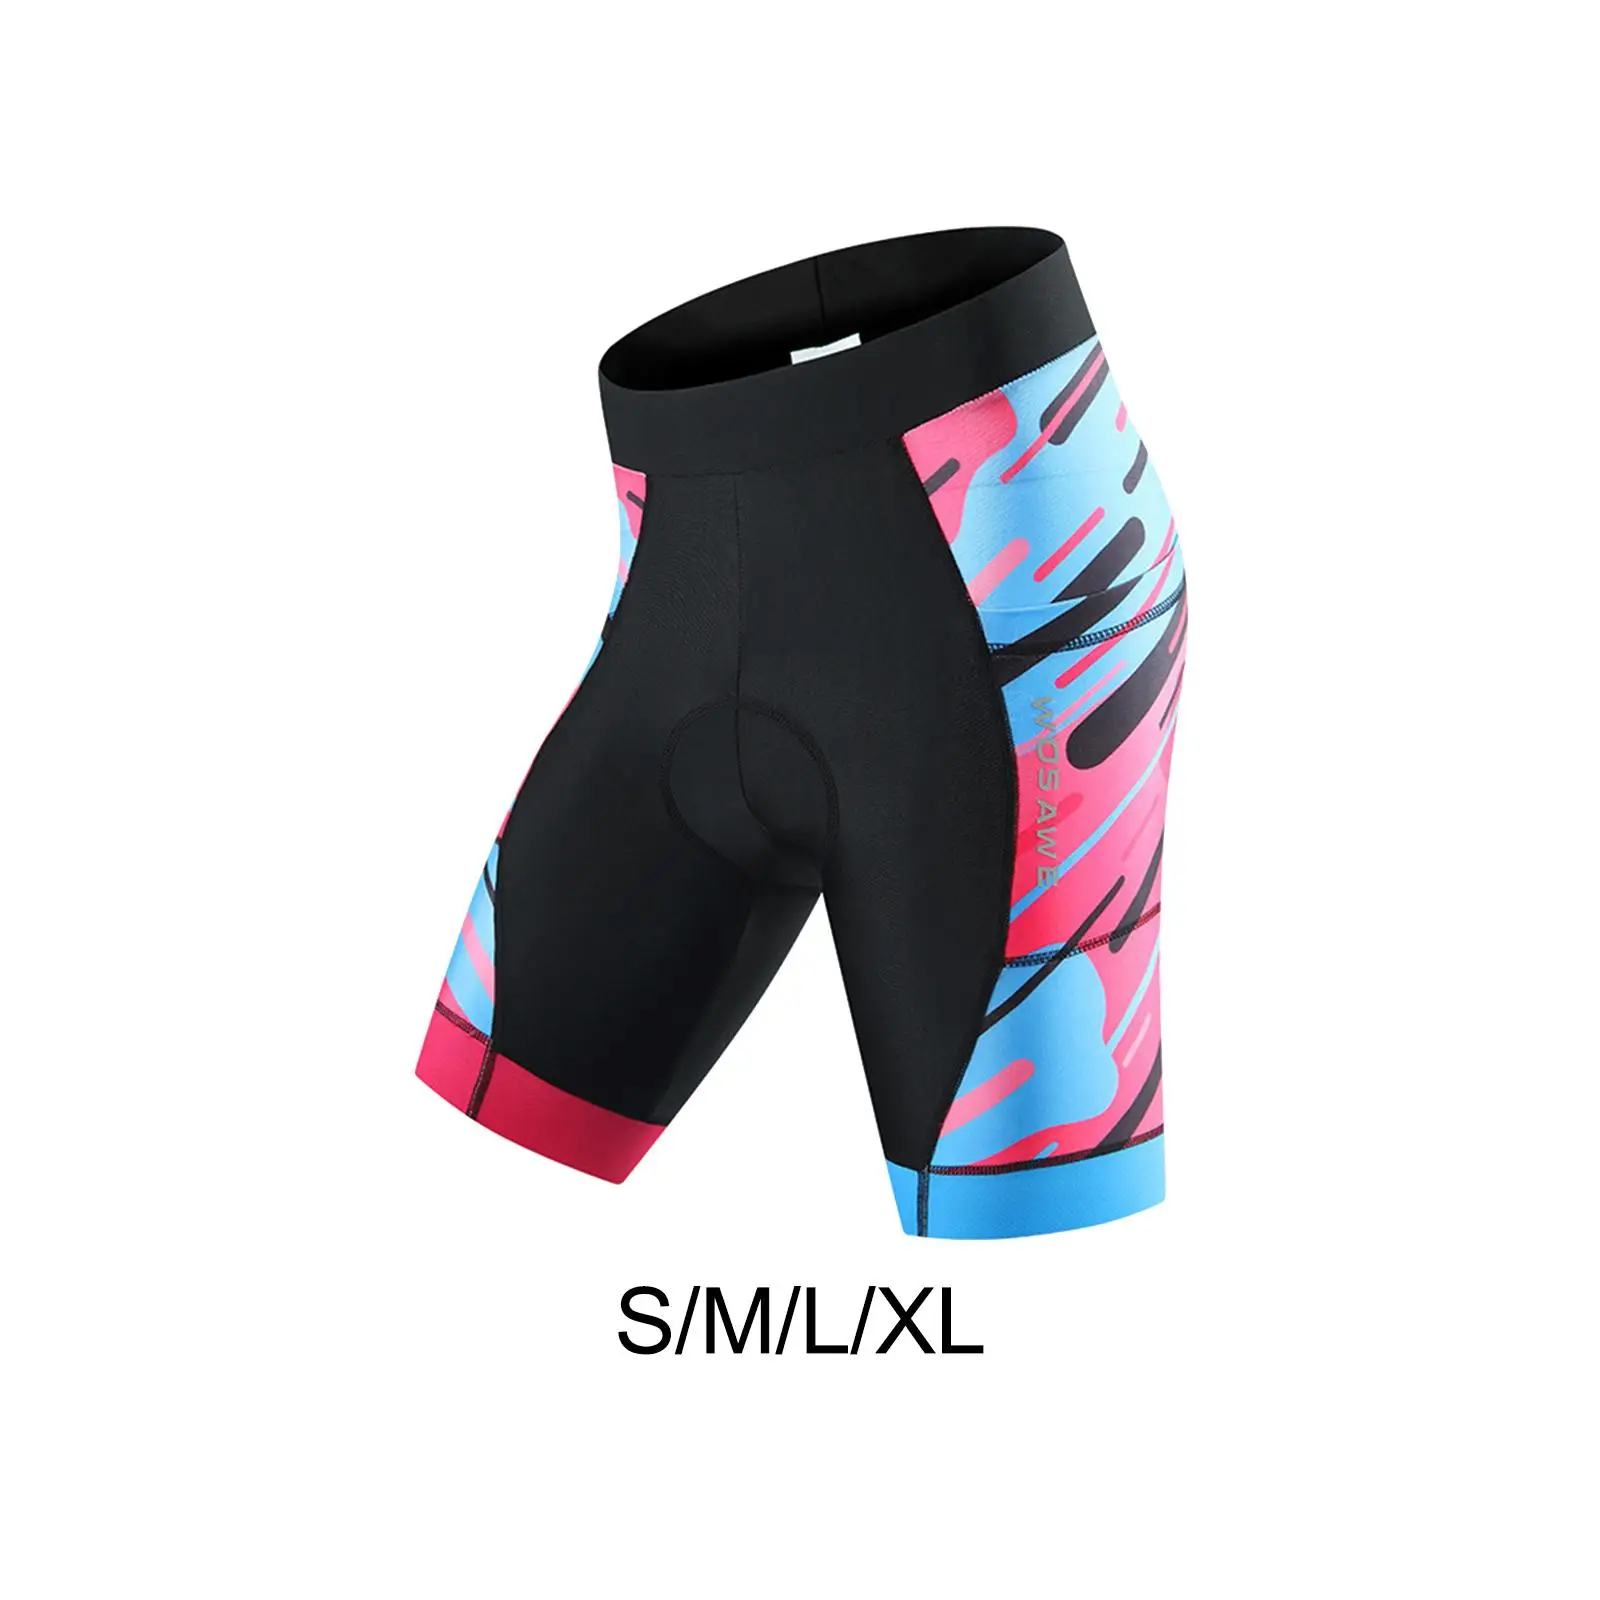 Biker Shorts for Women Fitness Activewear Comfort Necessities Cycling Underwear for Bike Sports Mountain Exercise Volleyball